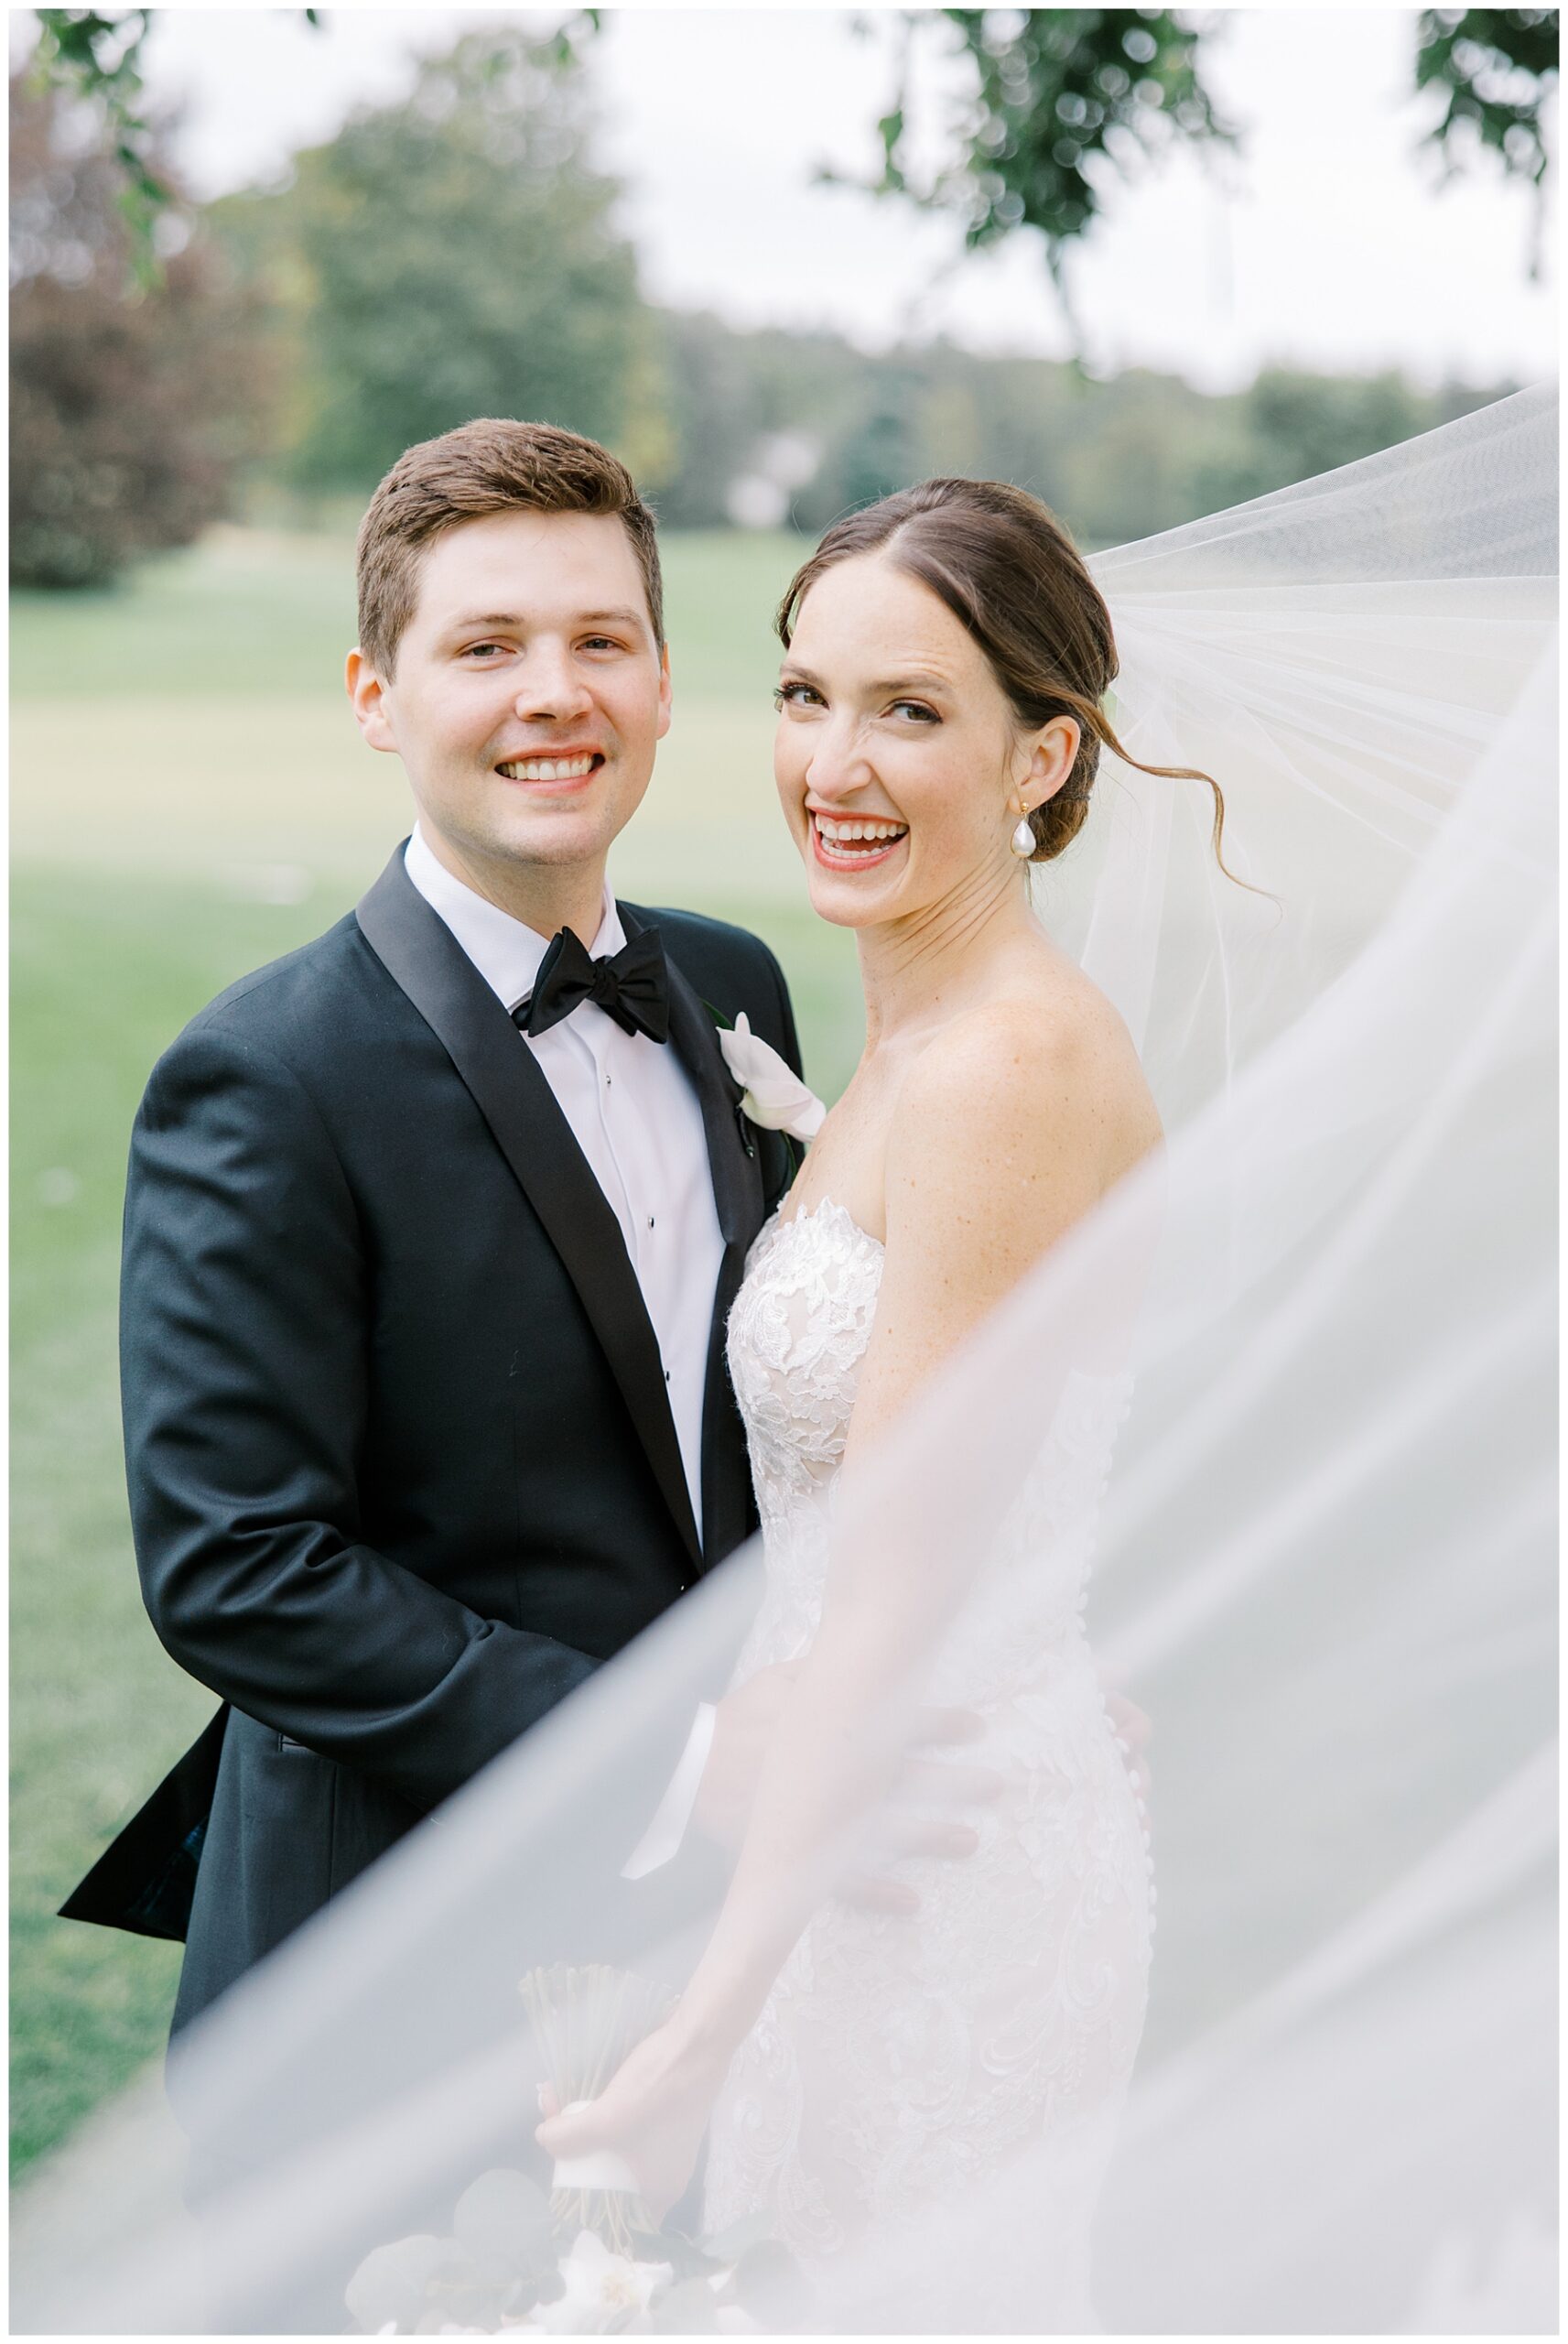 candid wedding portraits from romantic floral centered wedding 